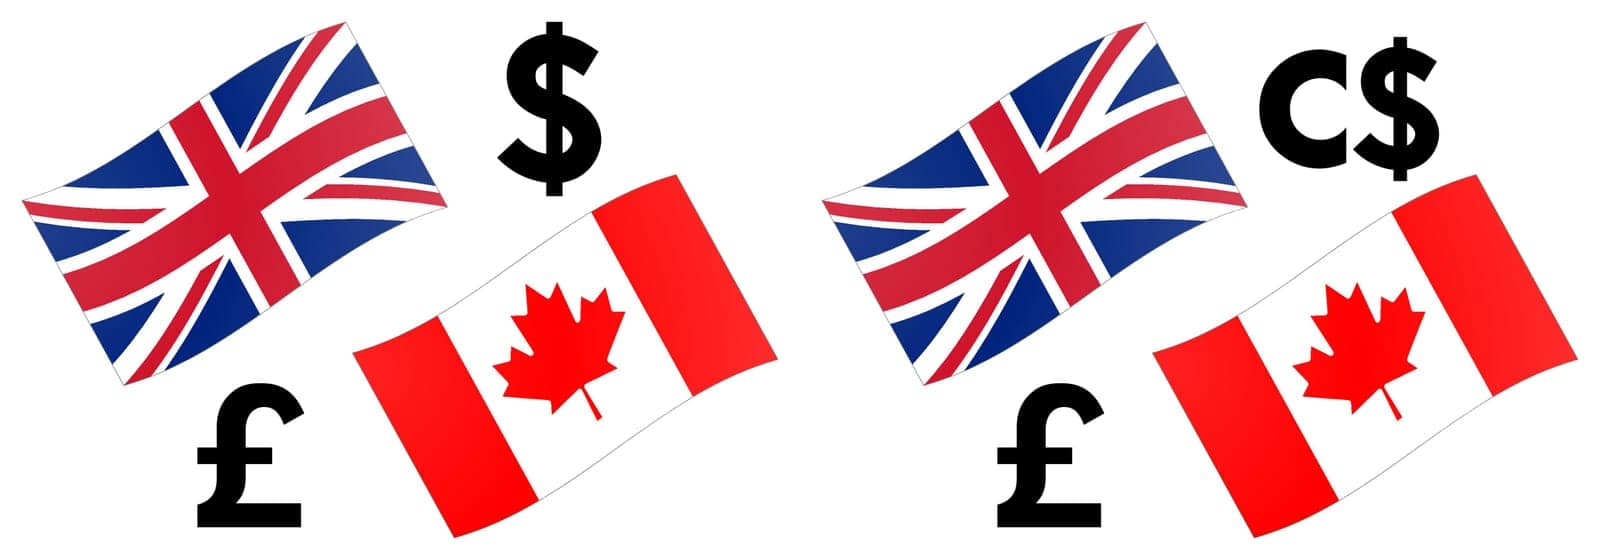 GBPCAD forex currency pair vector illustration. UK and Canada flag, with Pound and Dollar symbol. by Ivanko